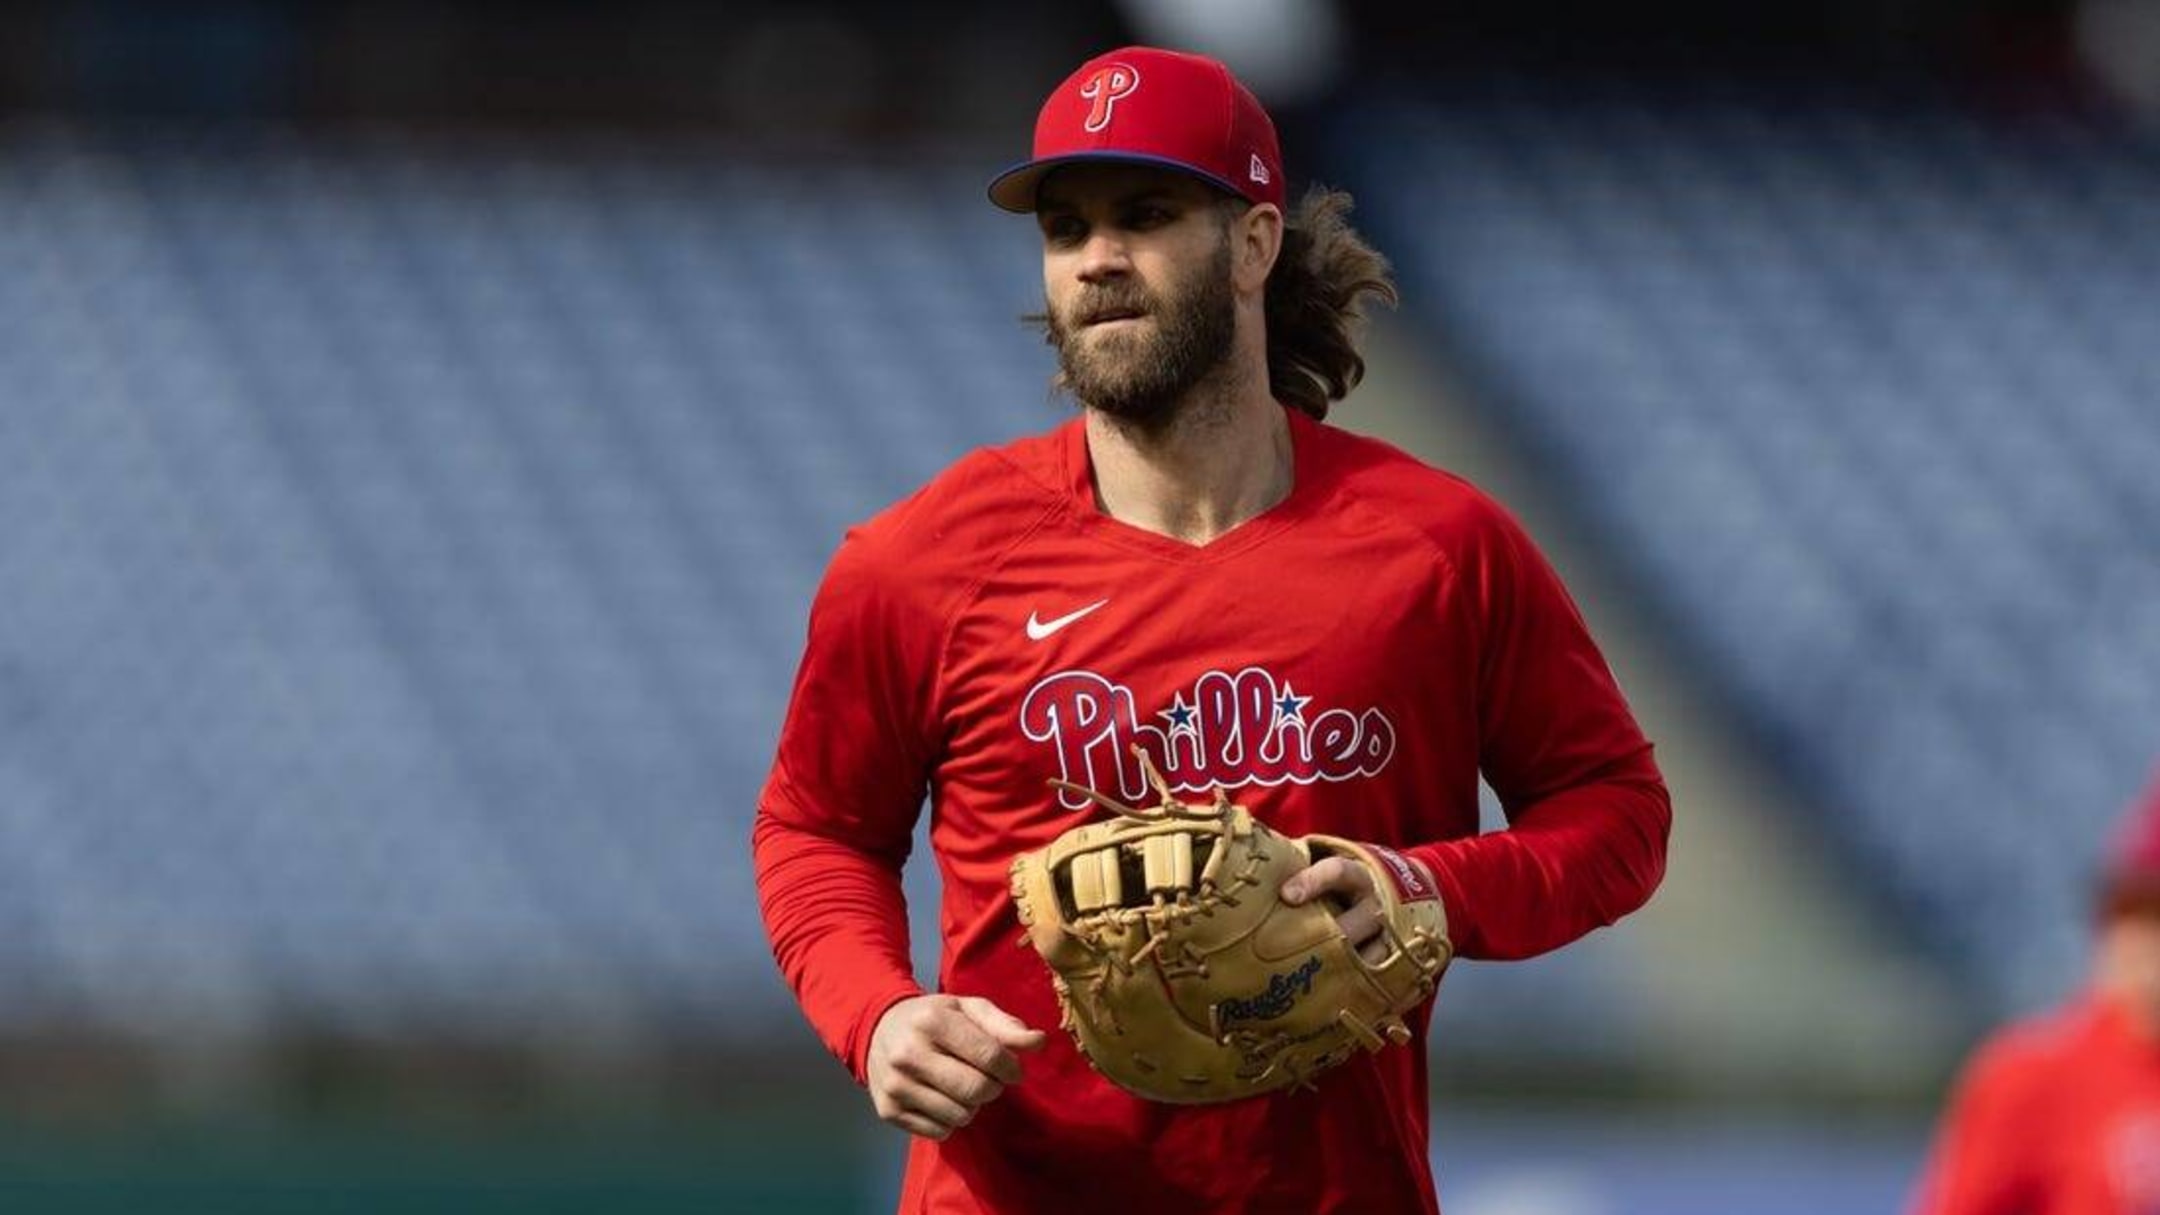 Toronto Blue Jays: Don't get too excited by Bryce Harper talk